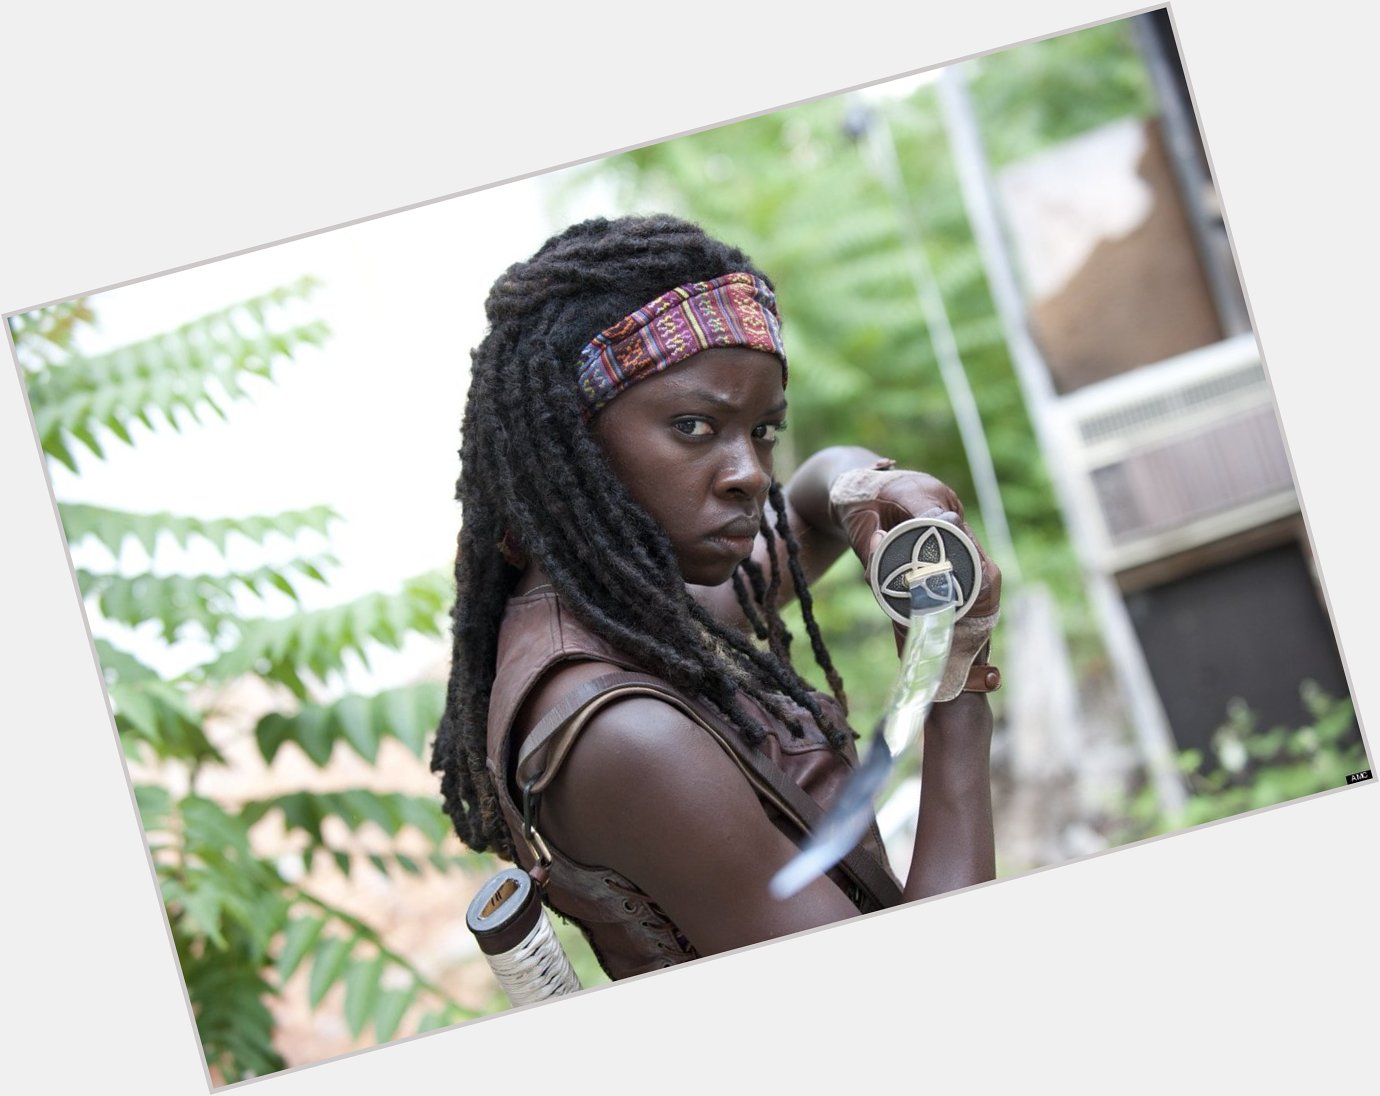 Big Happy Birthday Shout-Out To THE WALKING DEAD\s DANAI GURIRA!
 